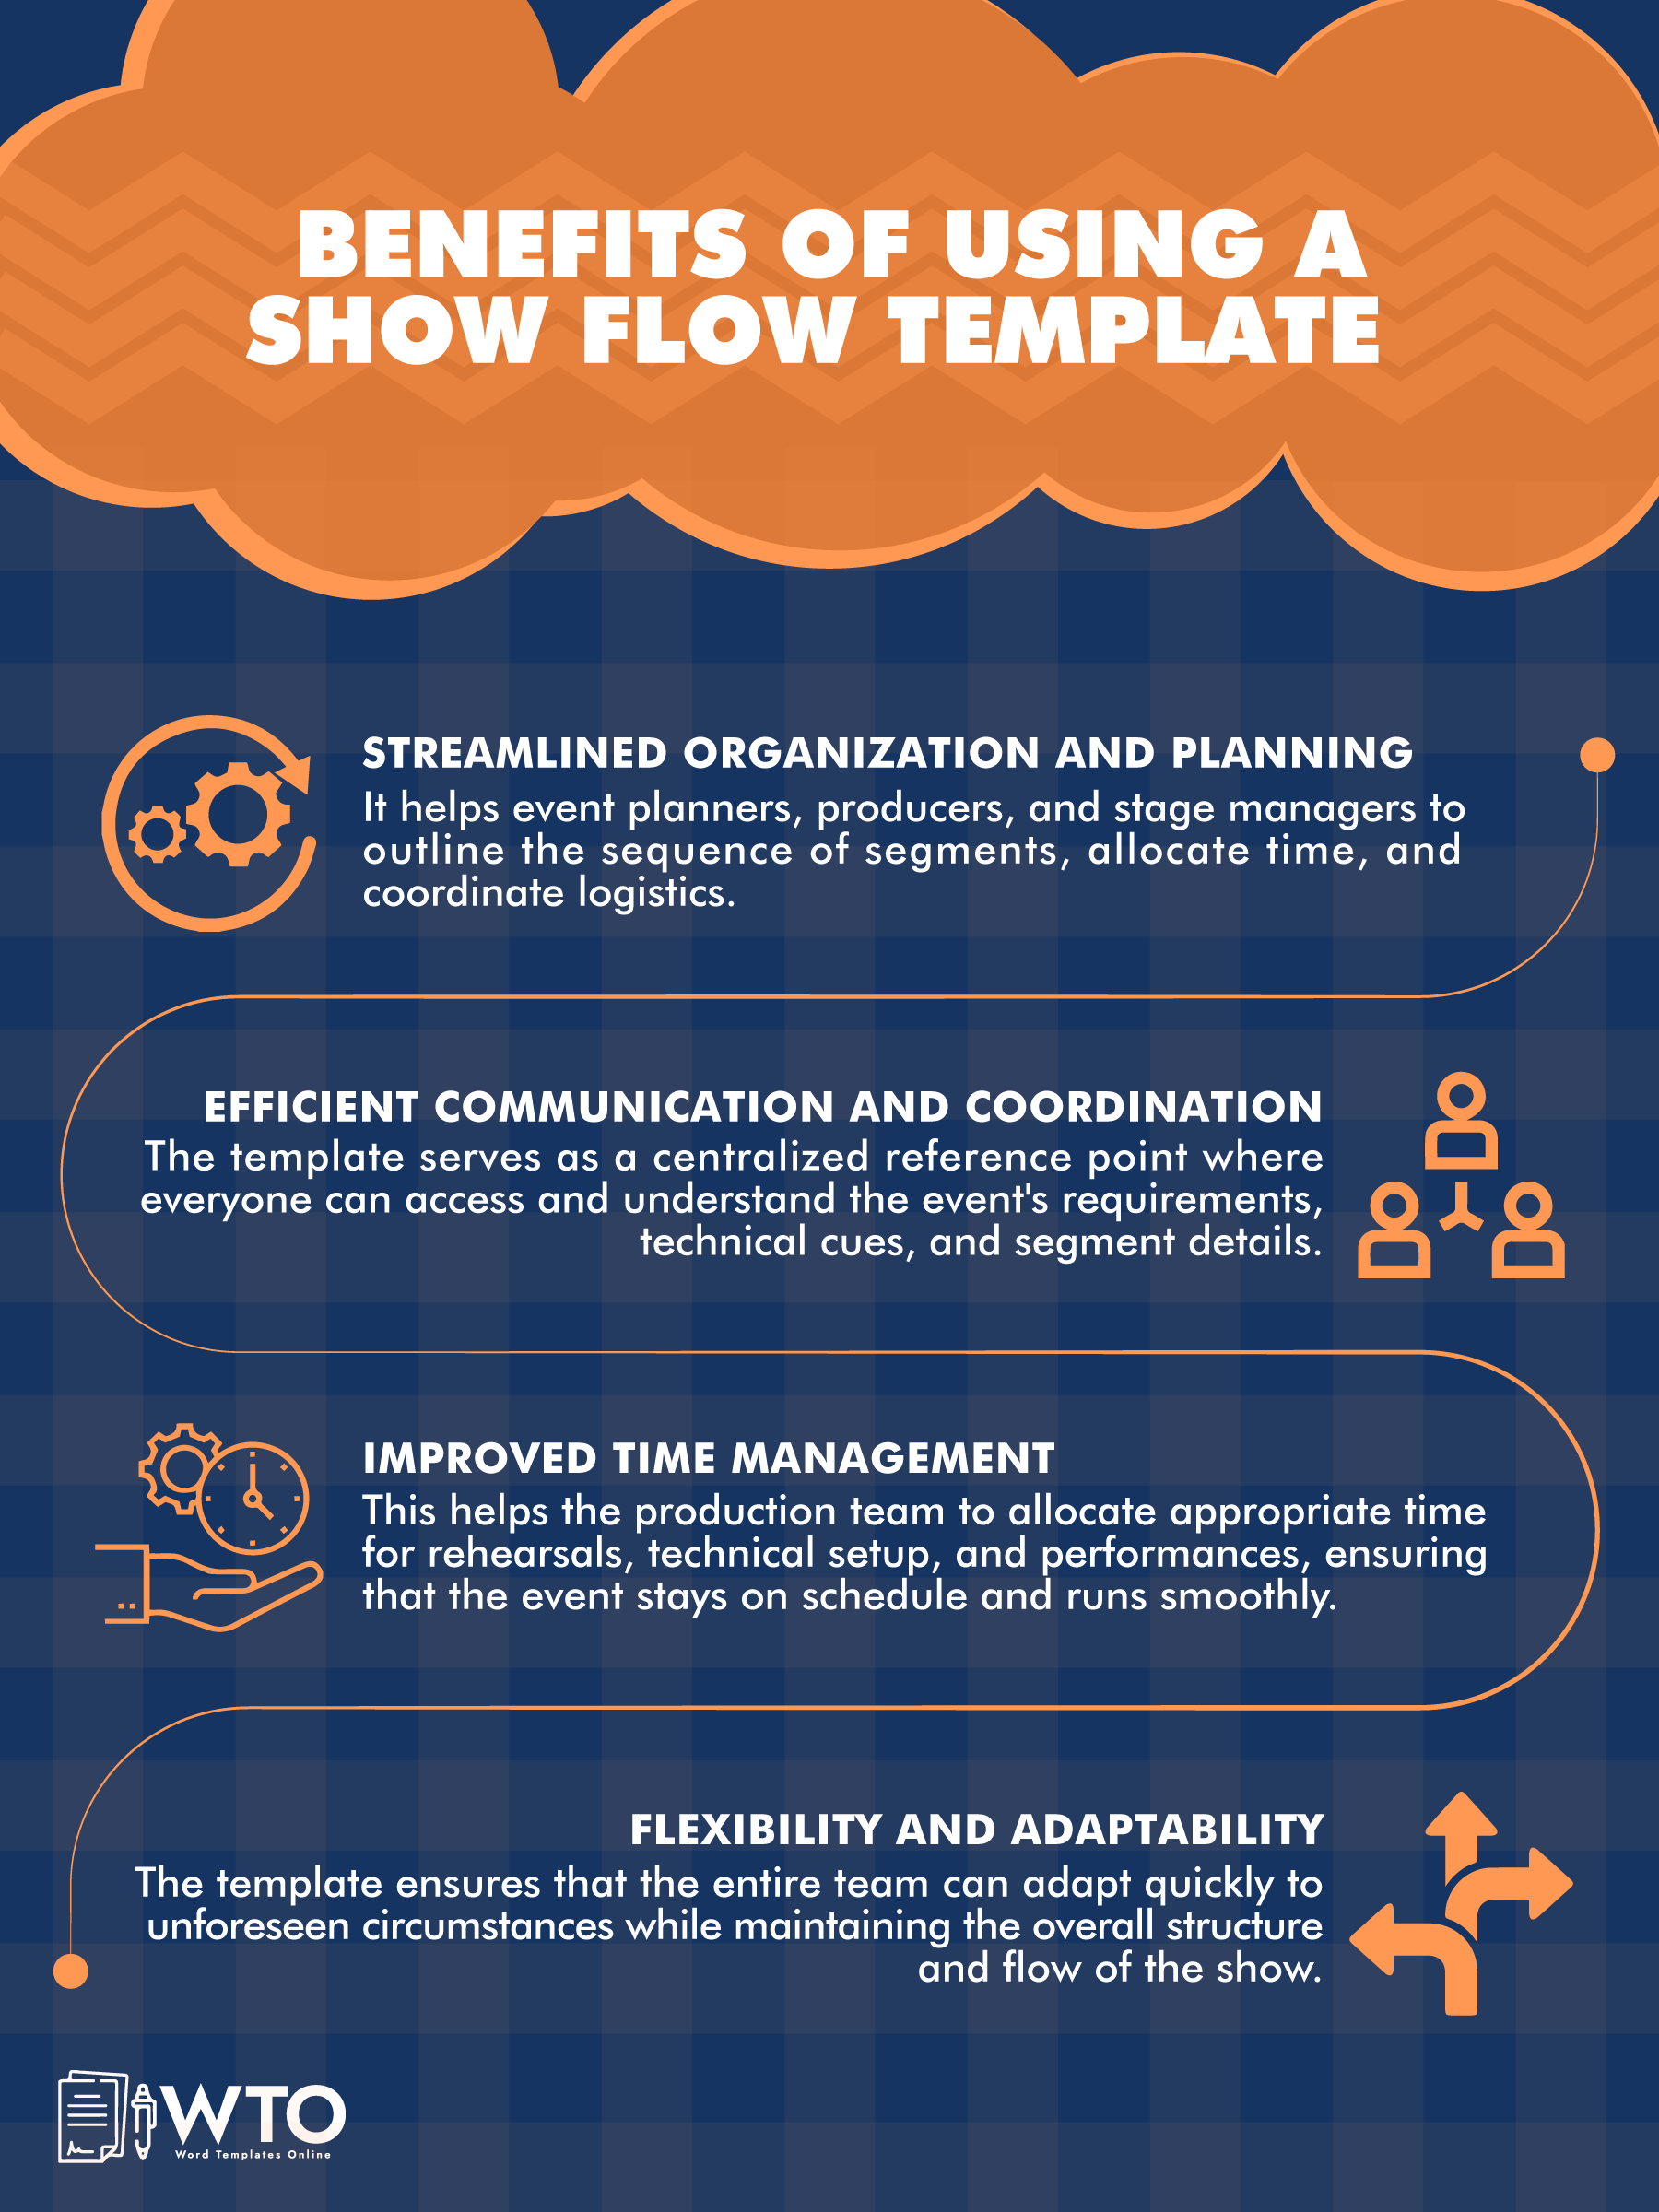 This infographic is about the benefits of using a show flow template.